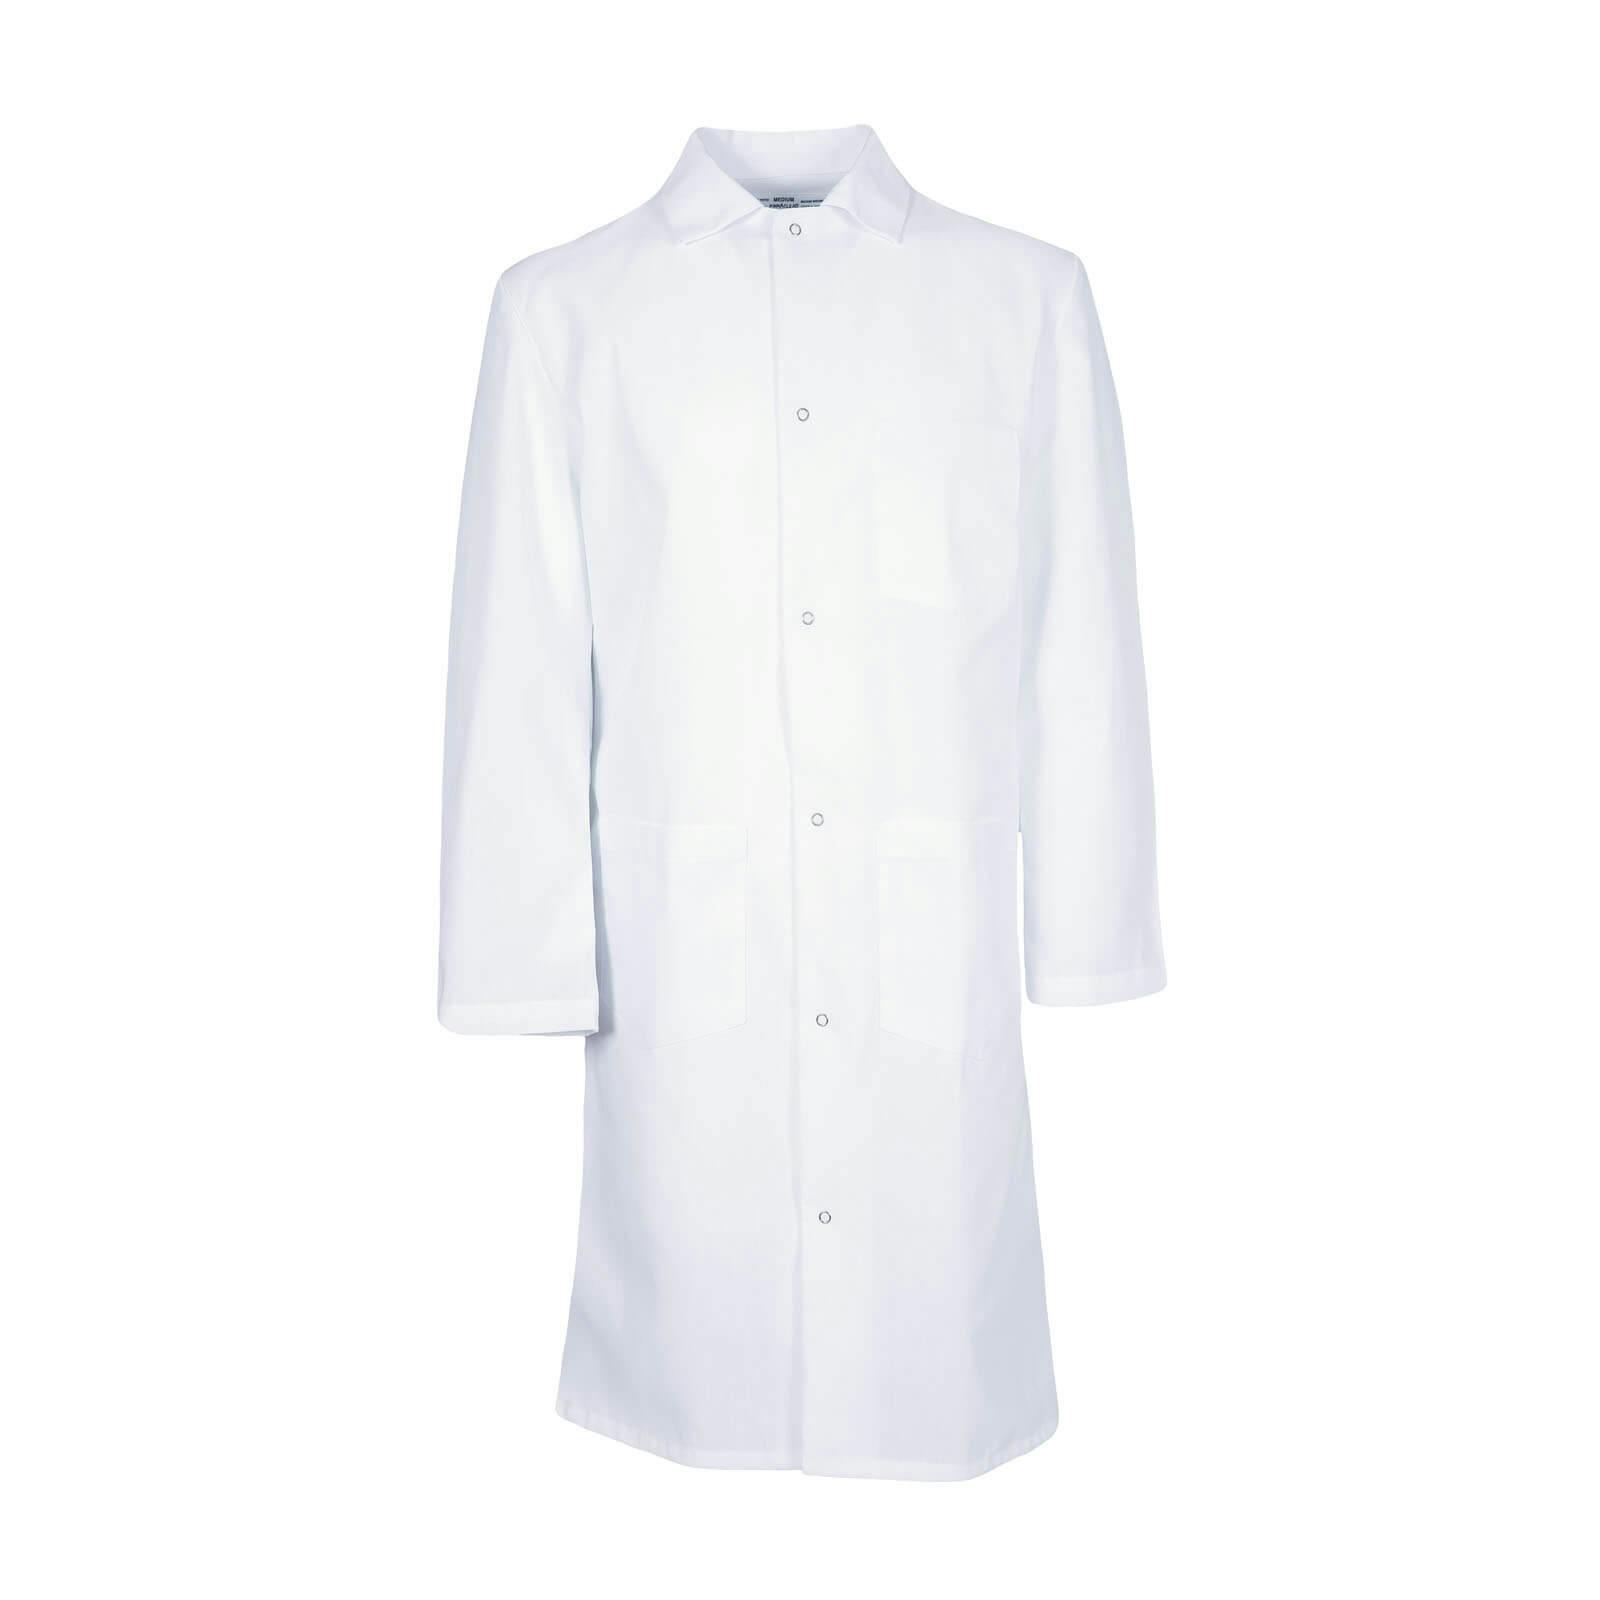 Pinnacle Butcher Frock with inside Top Pocket